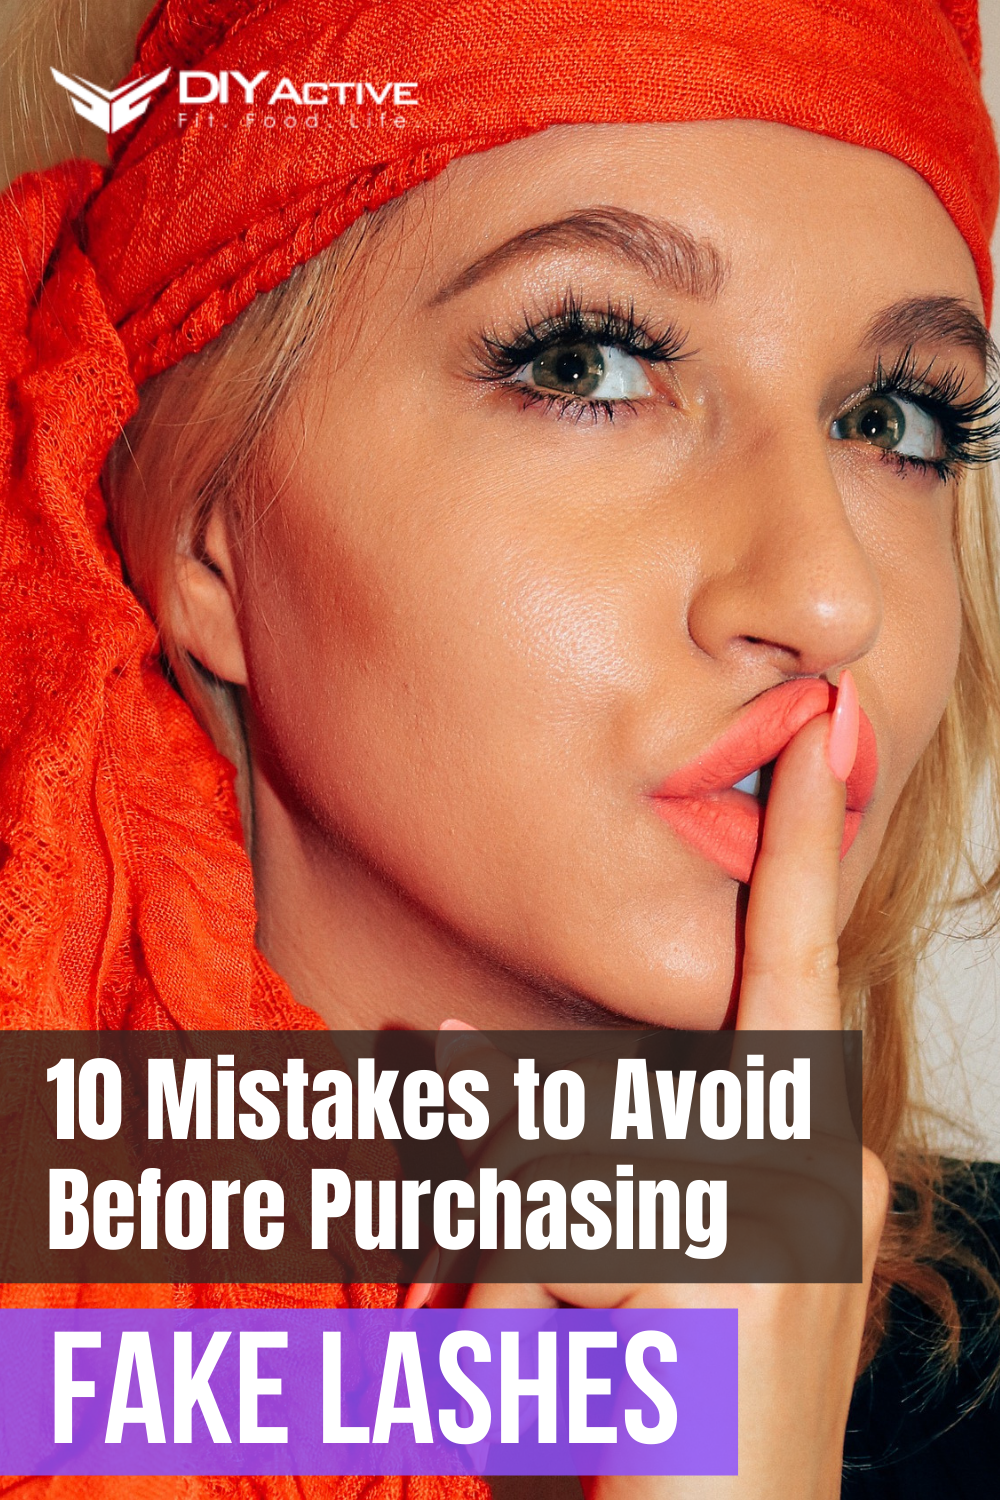 10 Mistakes to Avoid Before Purchasing Fake Lashes